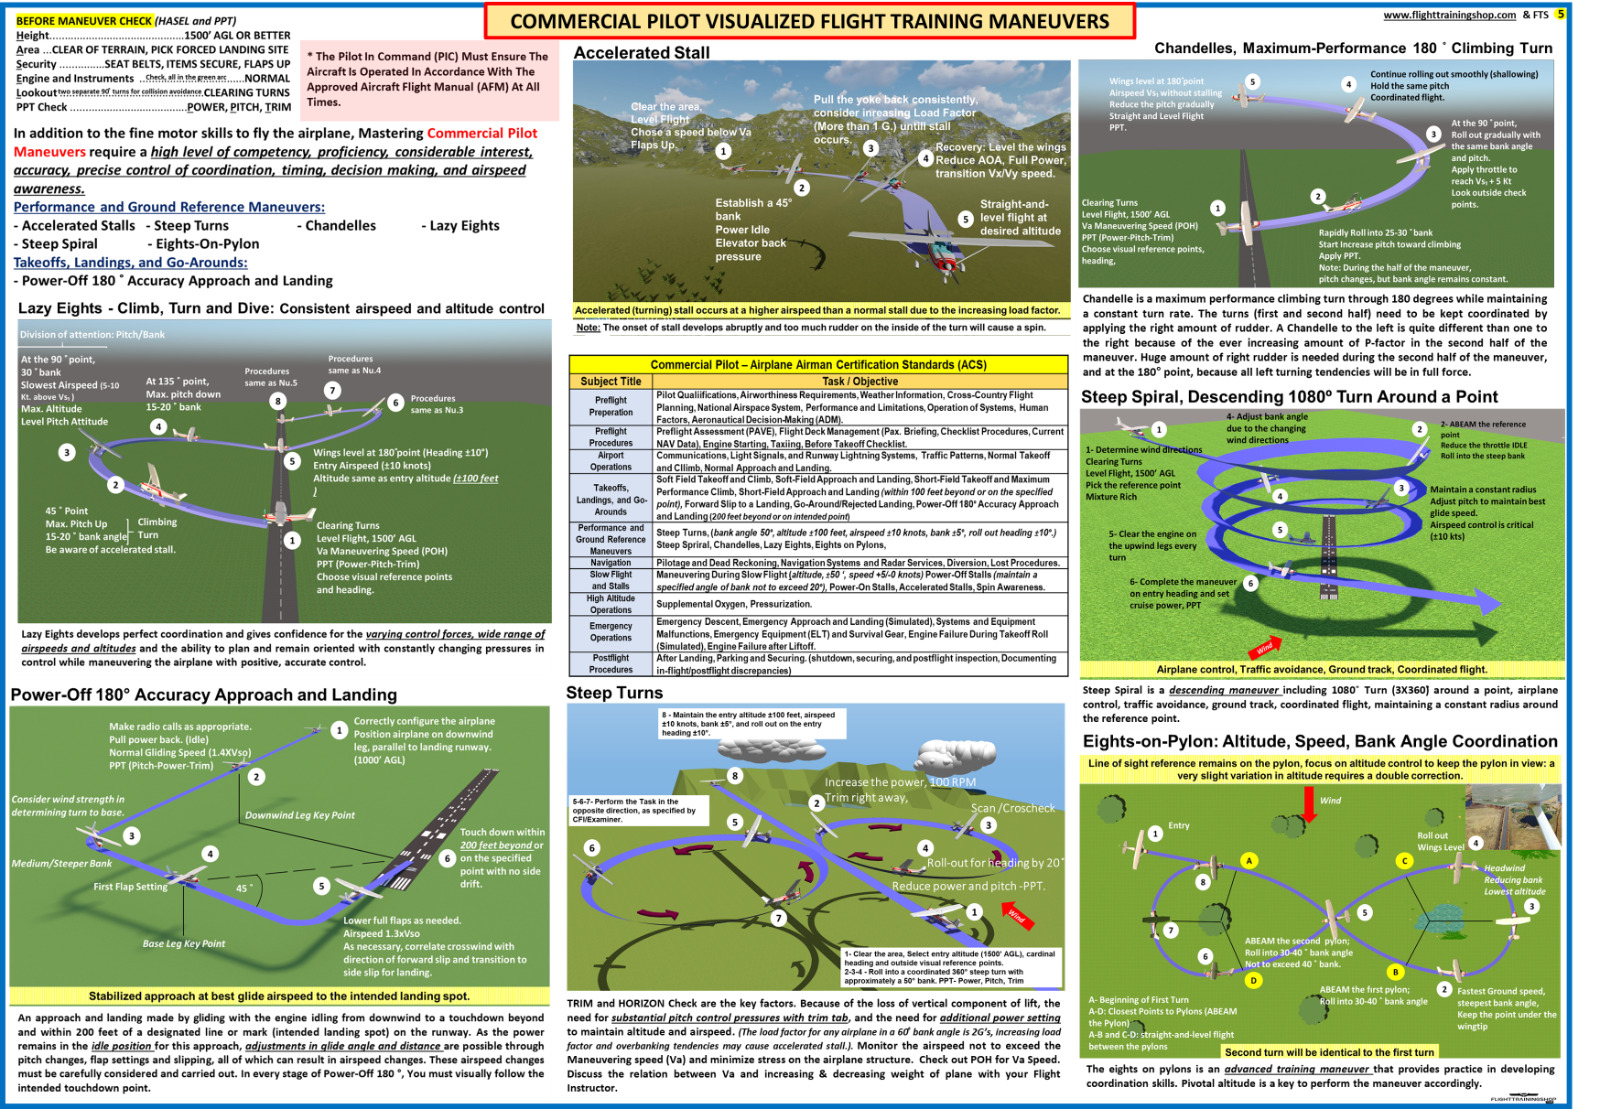 Commercial Pilot Visualized Flight Training Maneuvers, Poster, ALL IN ONE.